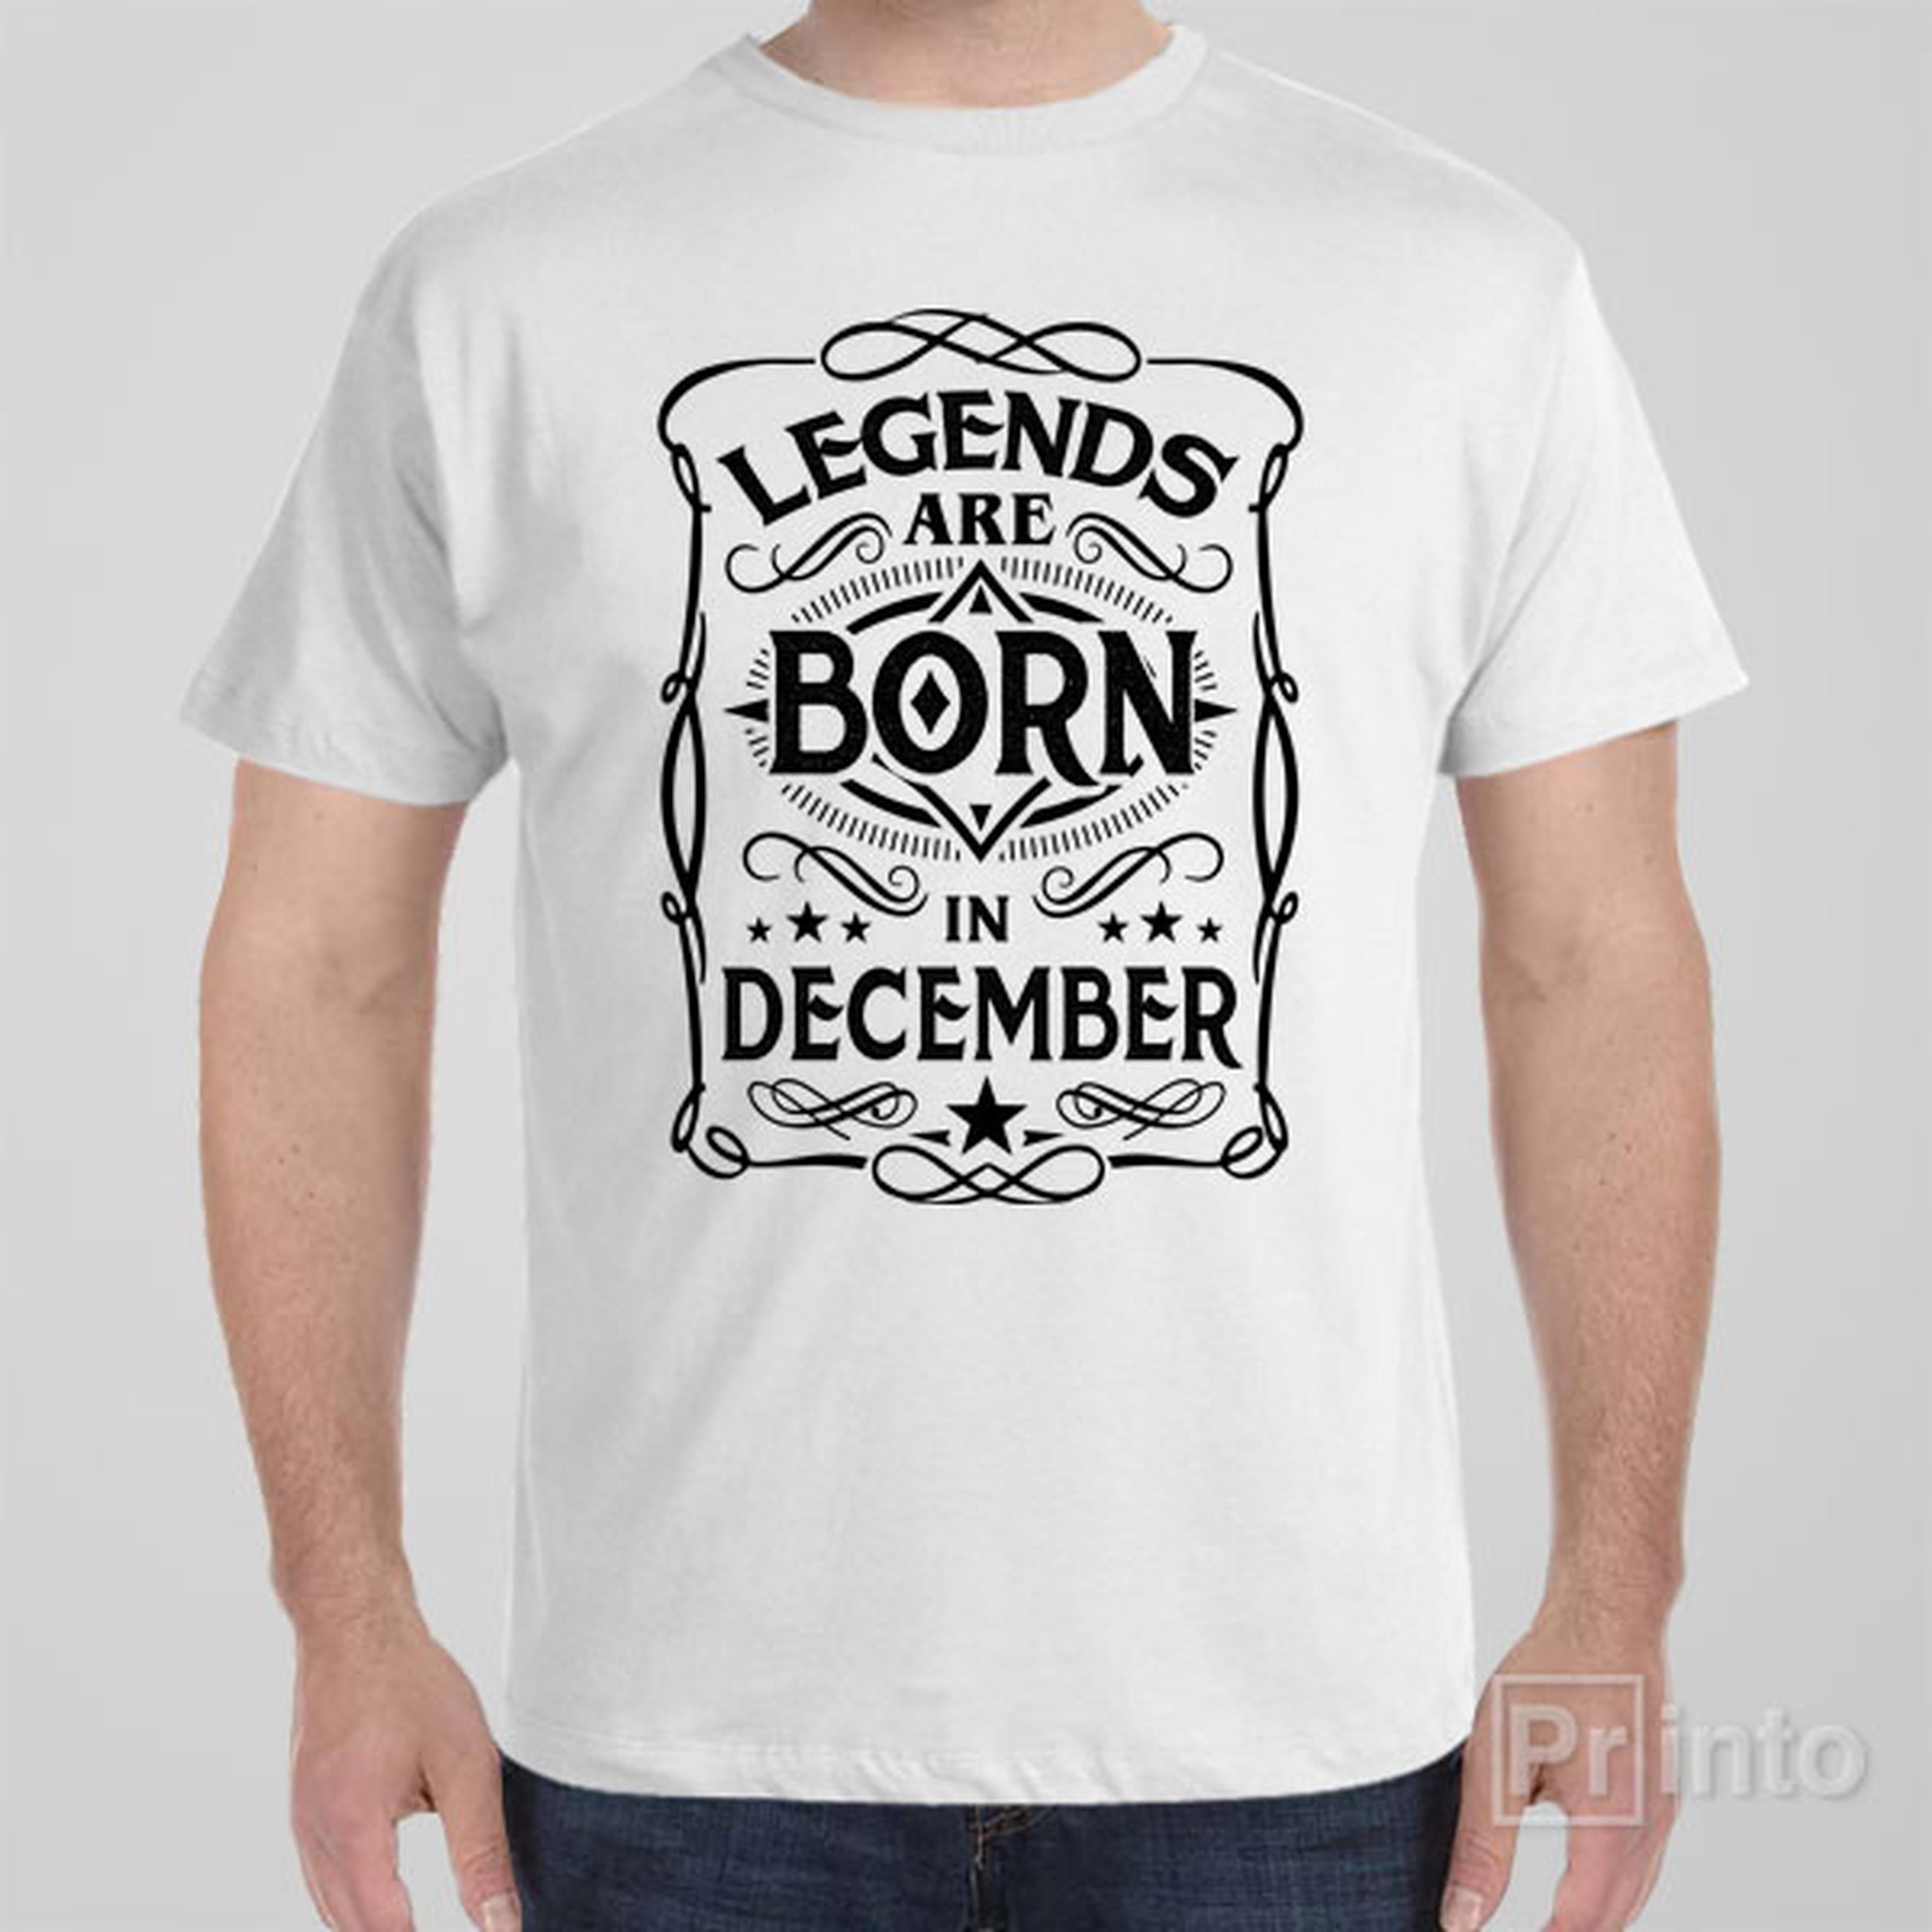 legends-are-born-in-december-t-shirt